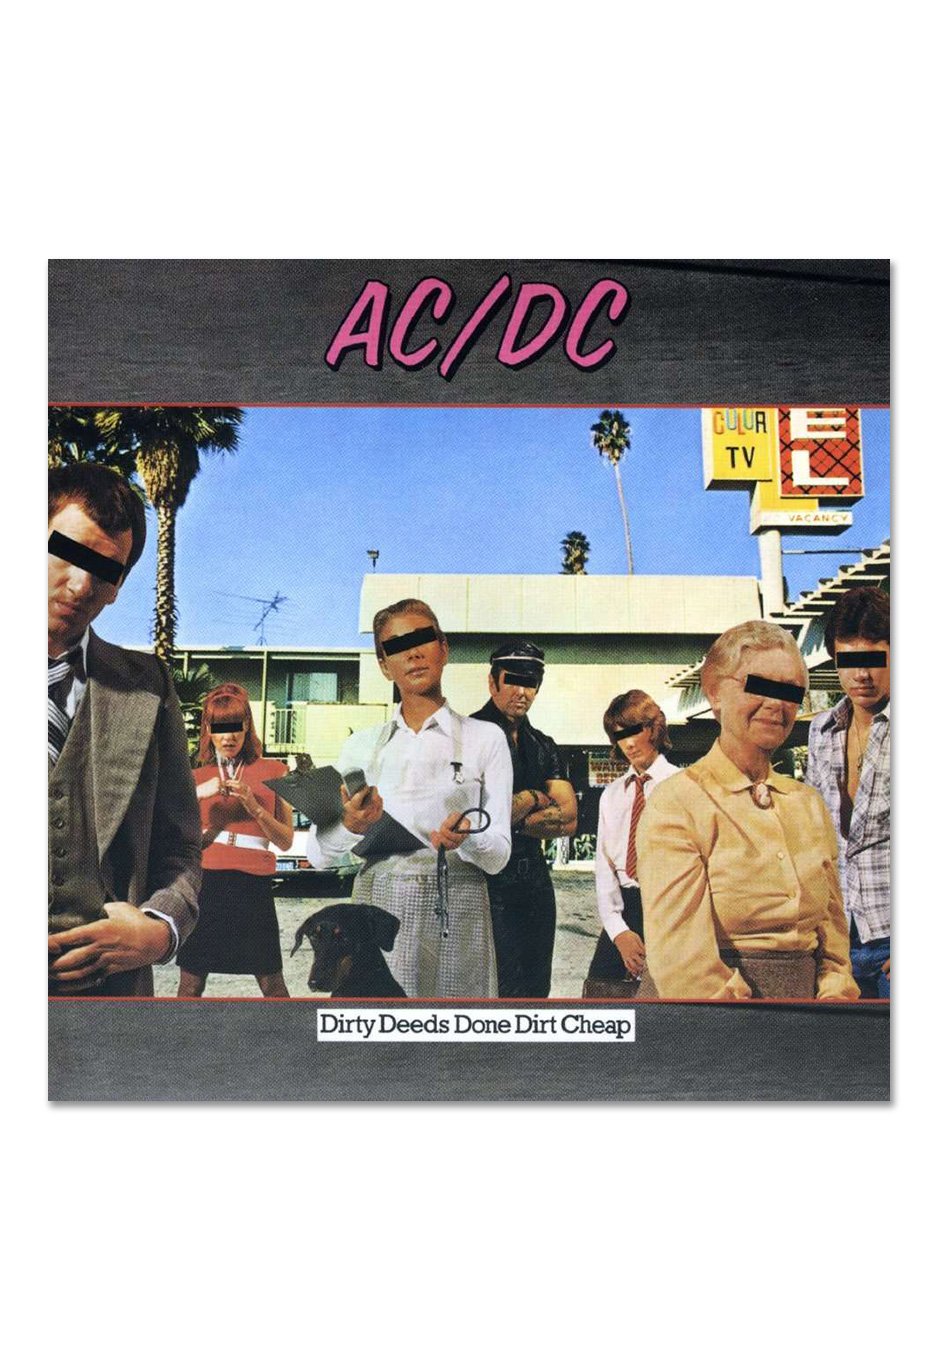 AC/DC - Dirty Deeds Done Dirt Cheap (Limited 50th Anniversary Edition) Gold - Colored Vinyl